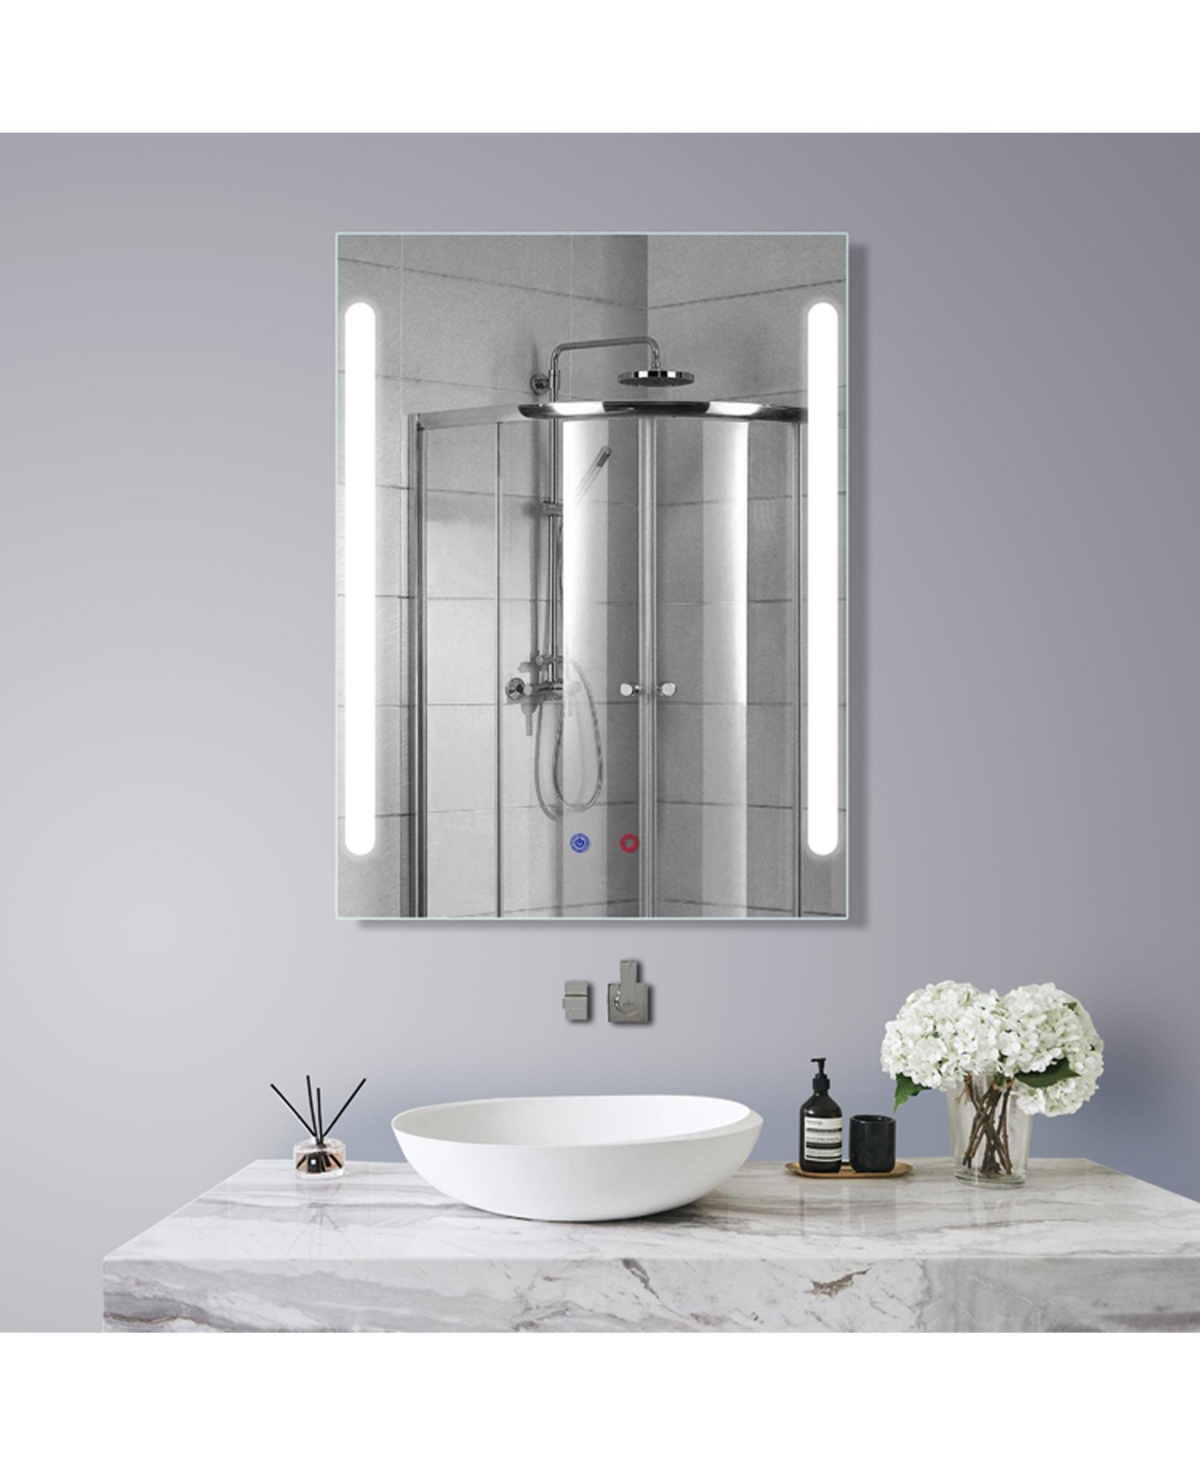 24"x32" Smart Bathroom Mirror with Dimmable Led Anti Fog Vanity - Open White